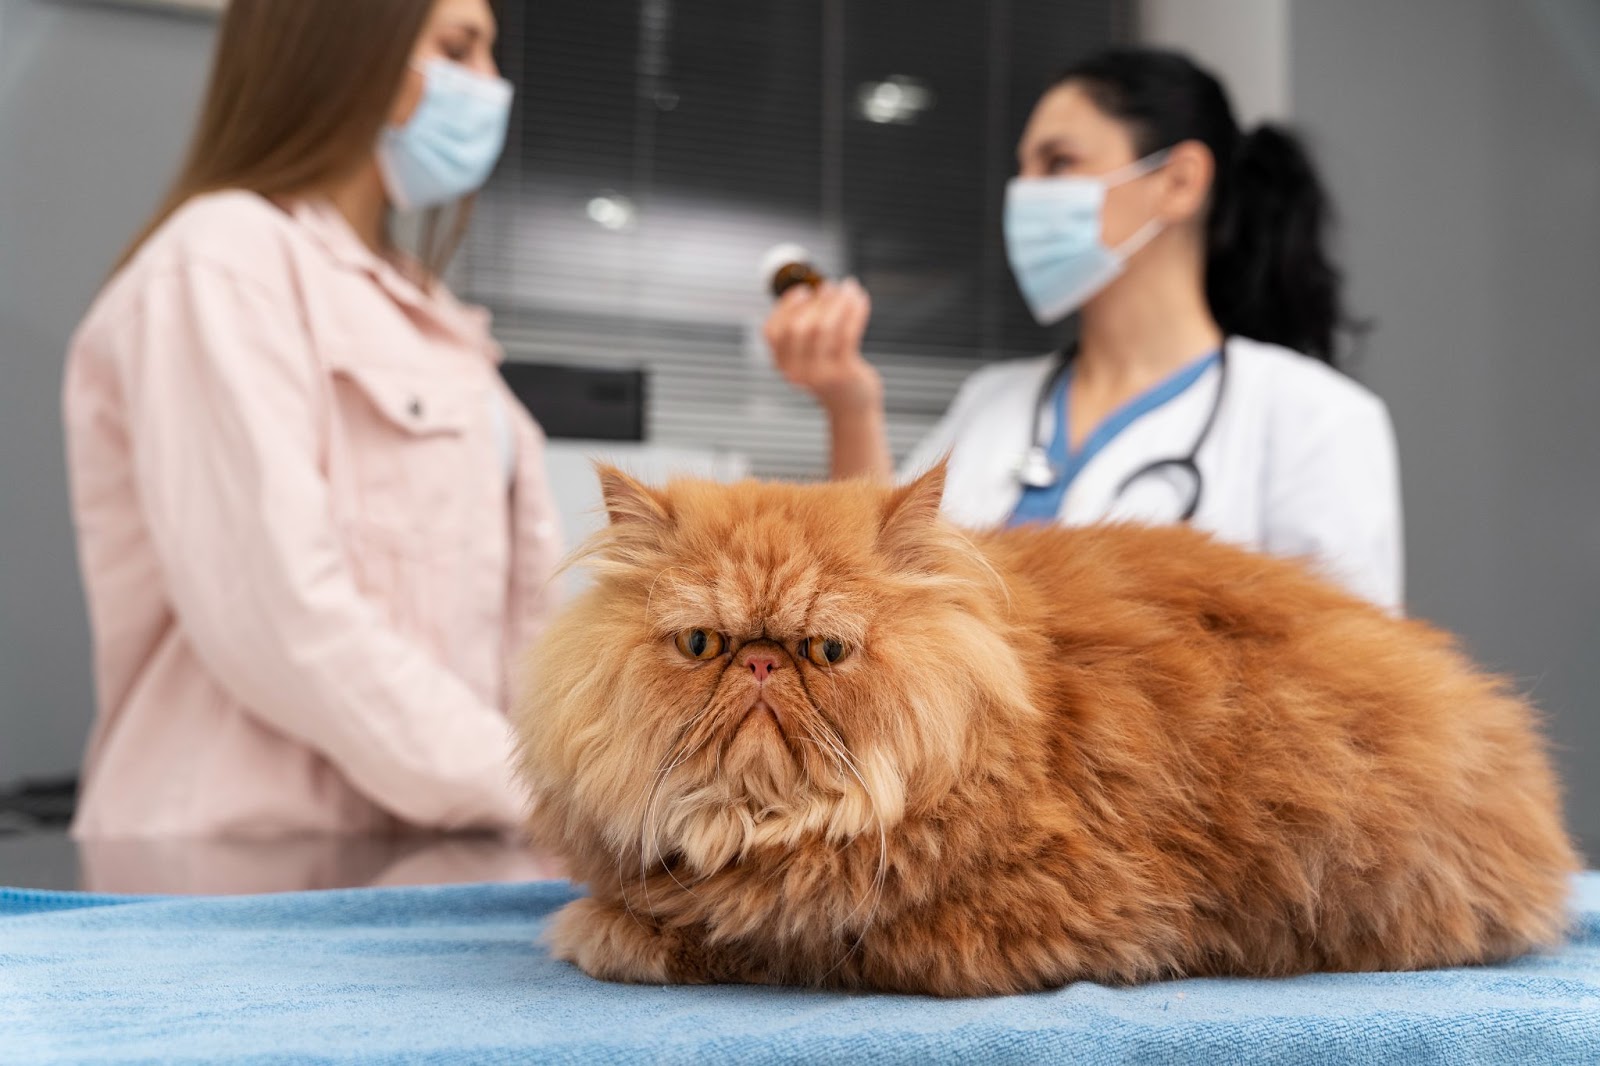 Vaccination for pet